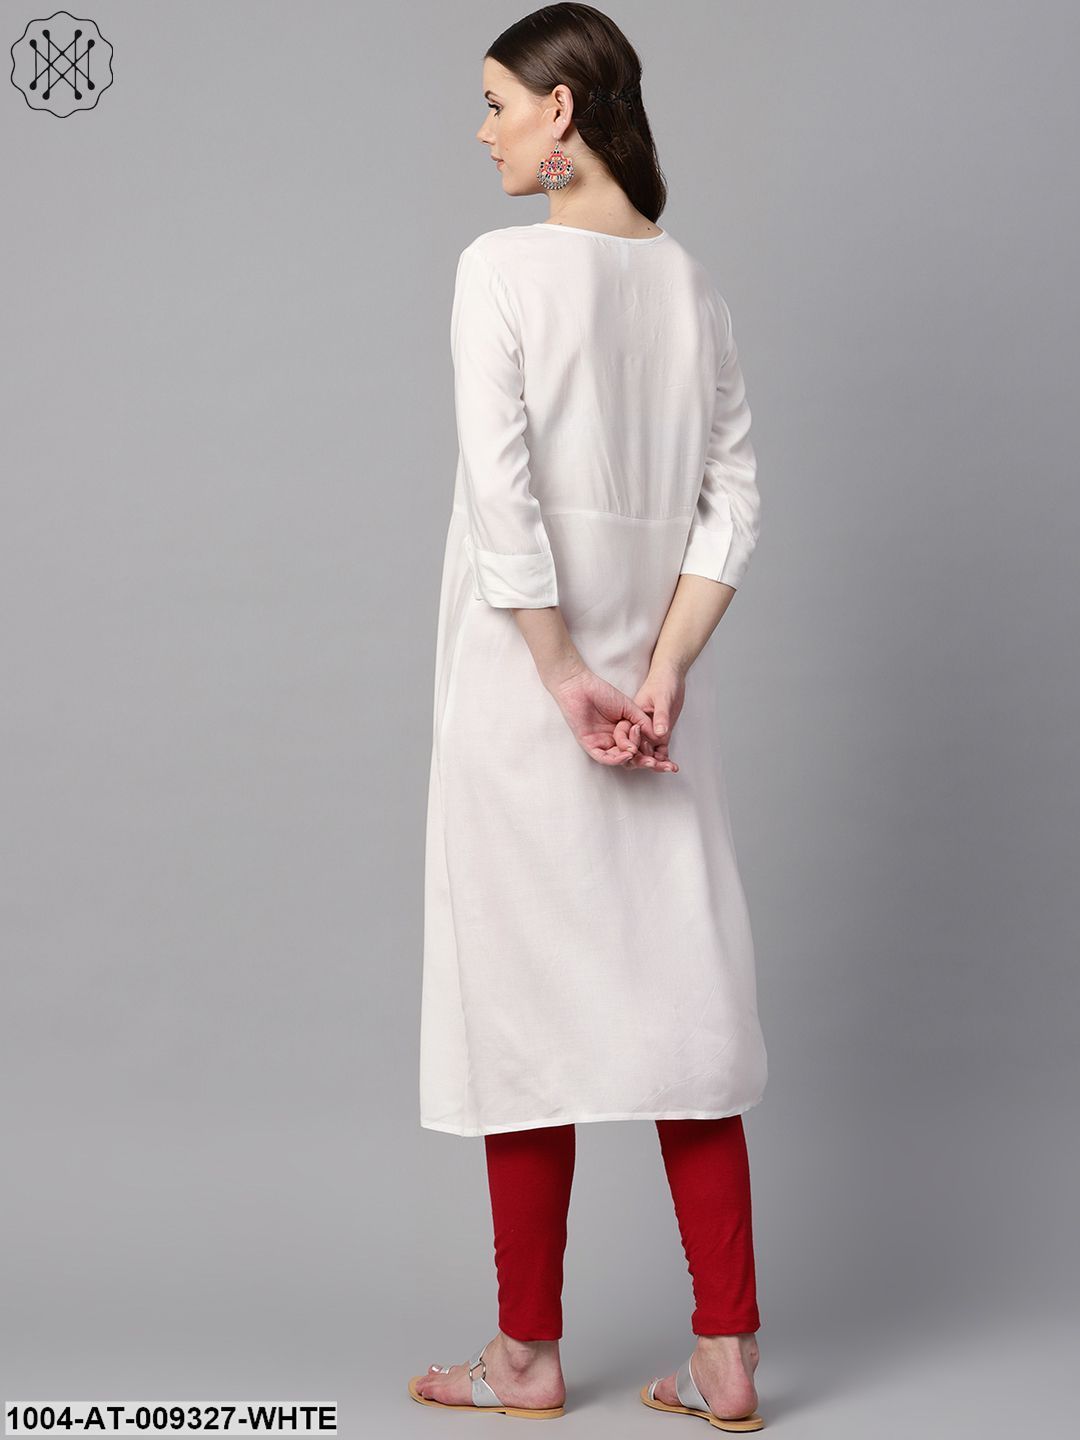 White Color Solid Round Neck A-Line Kurta With Embroidered Yoke.